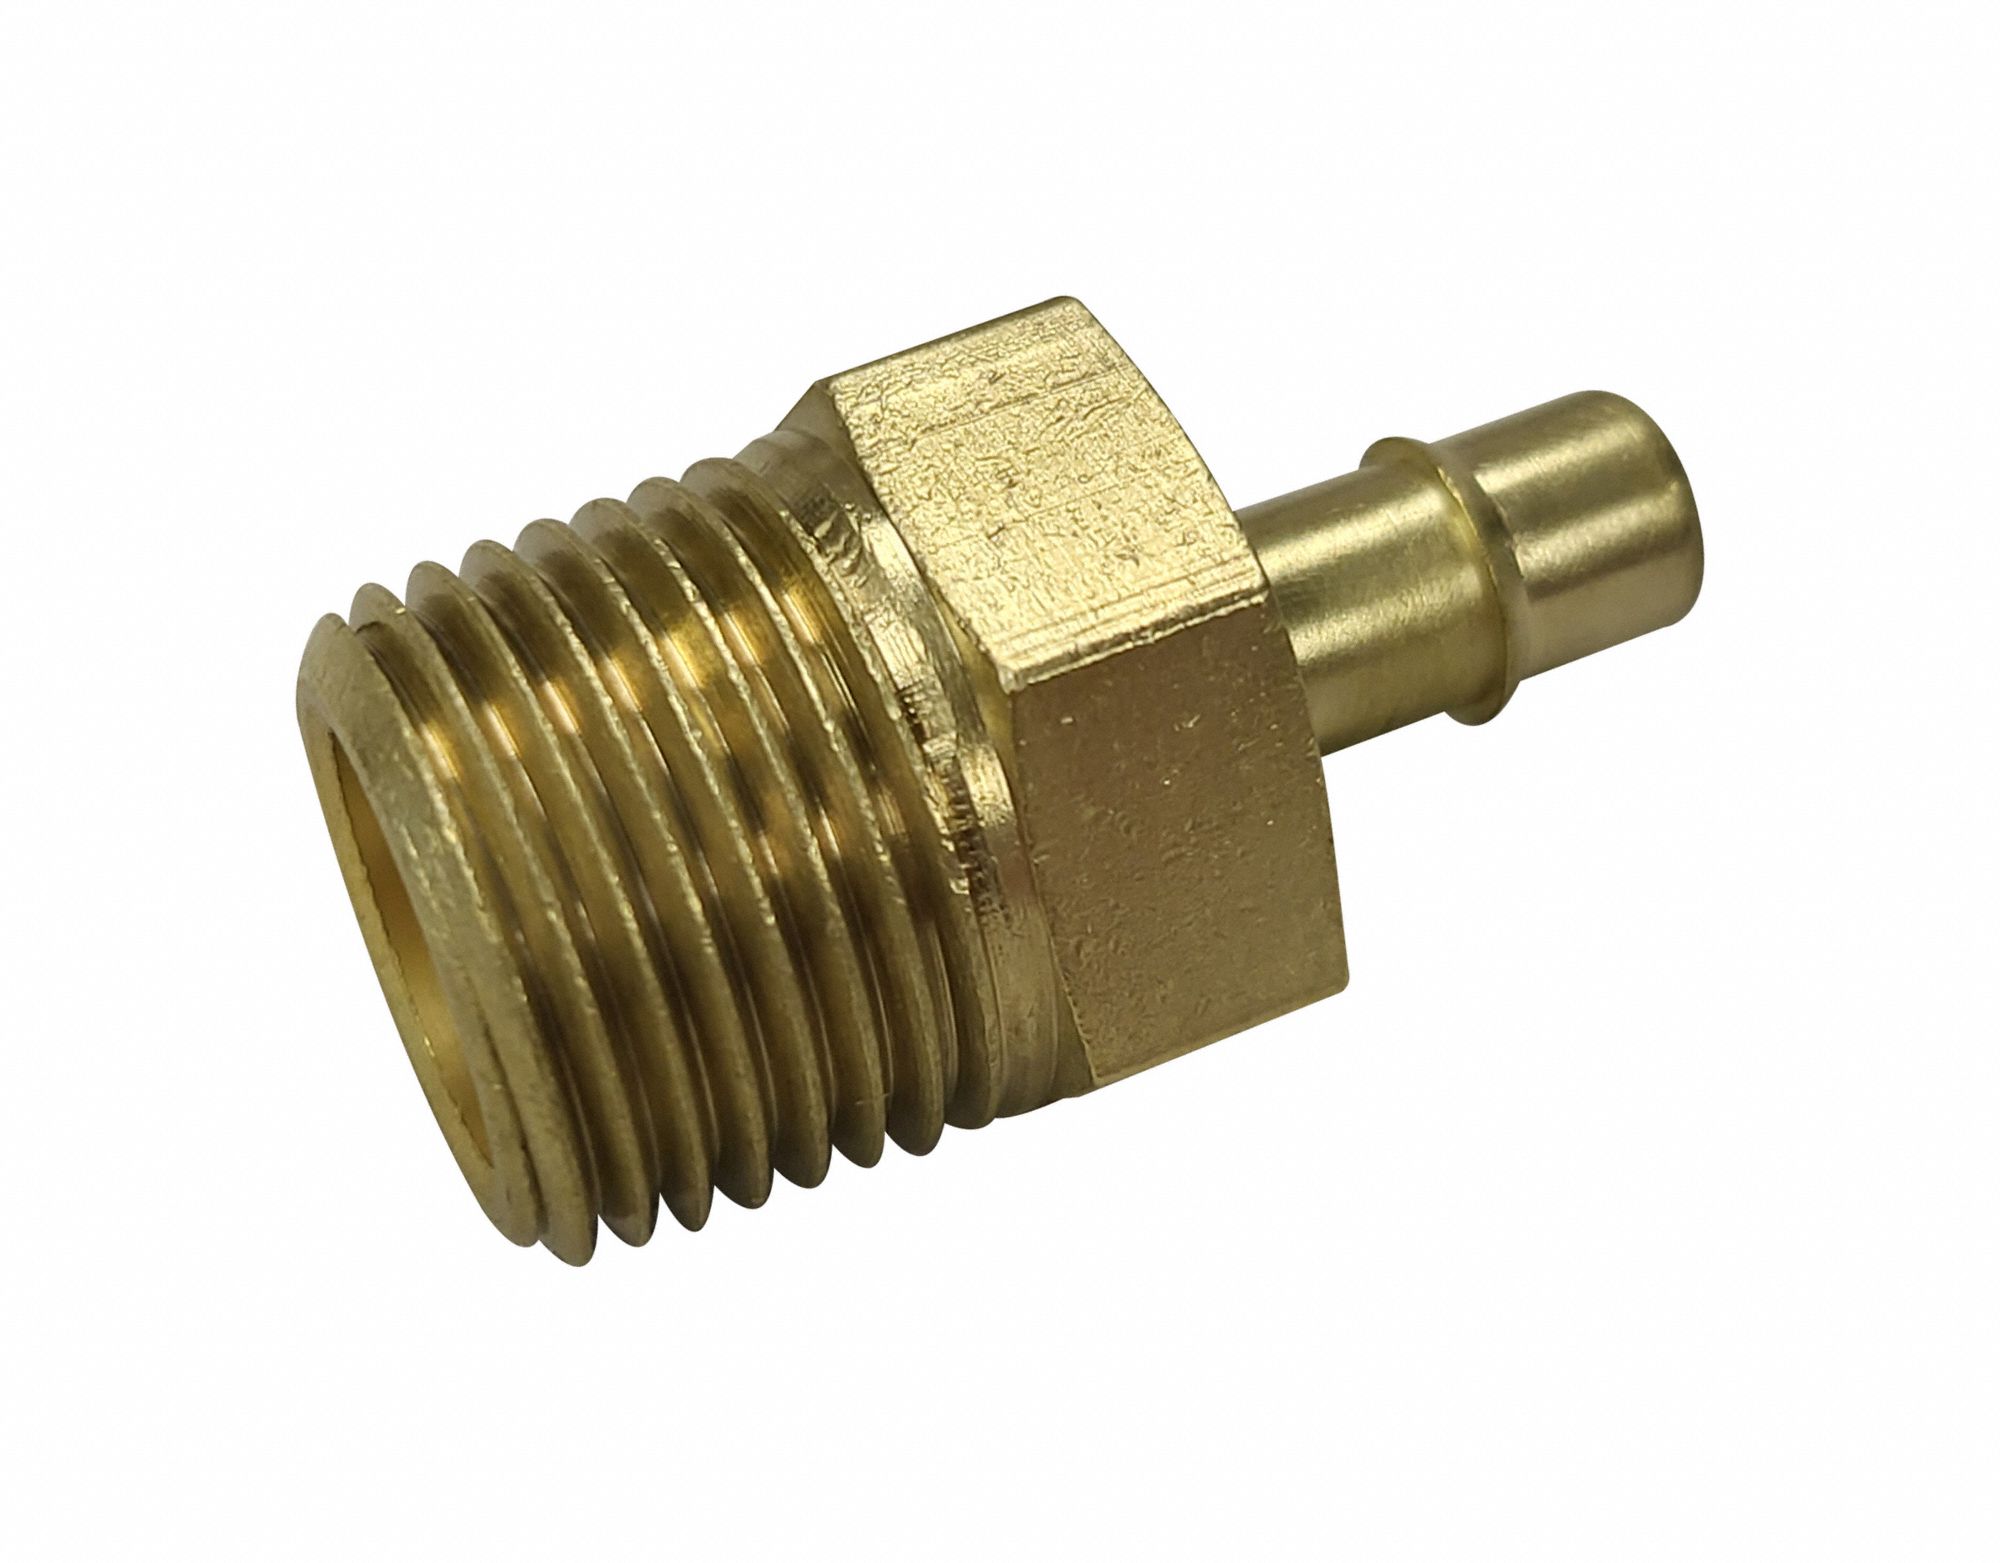 MINI BARB FITTING: Brass, MNPT x Barbed, For 1/4 in Tube ID, 1/2 in Pipe  Size, 1 7/16 in Overall Lg